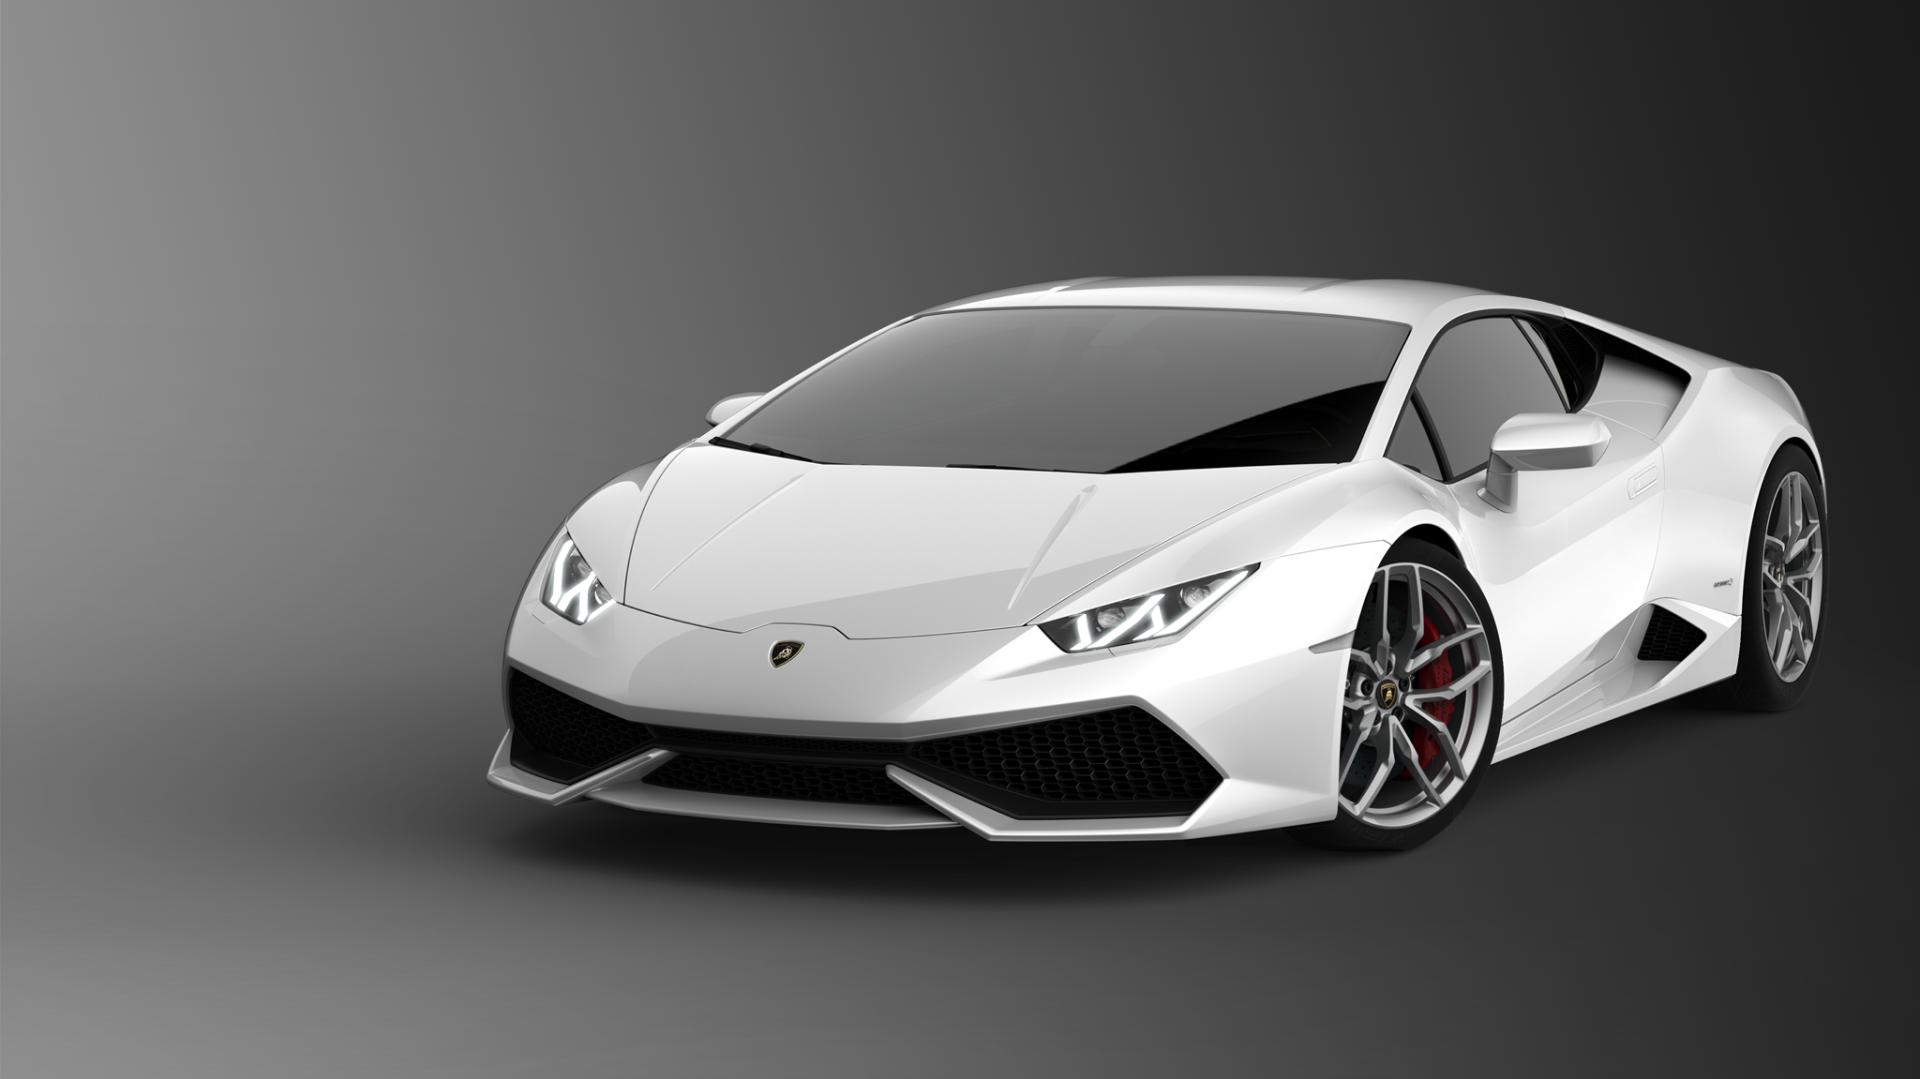 Welcome to the show of insane speed with Lamborghini 2014 model, Huracán LP610-4 #9